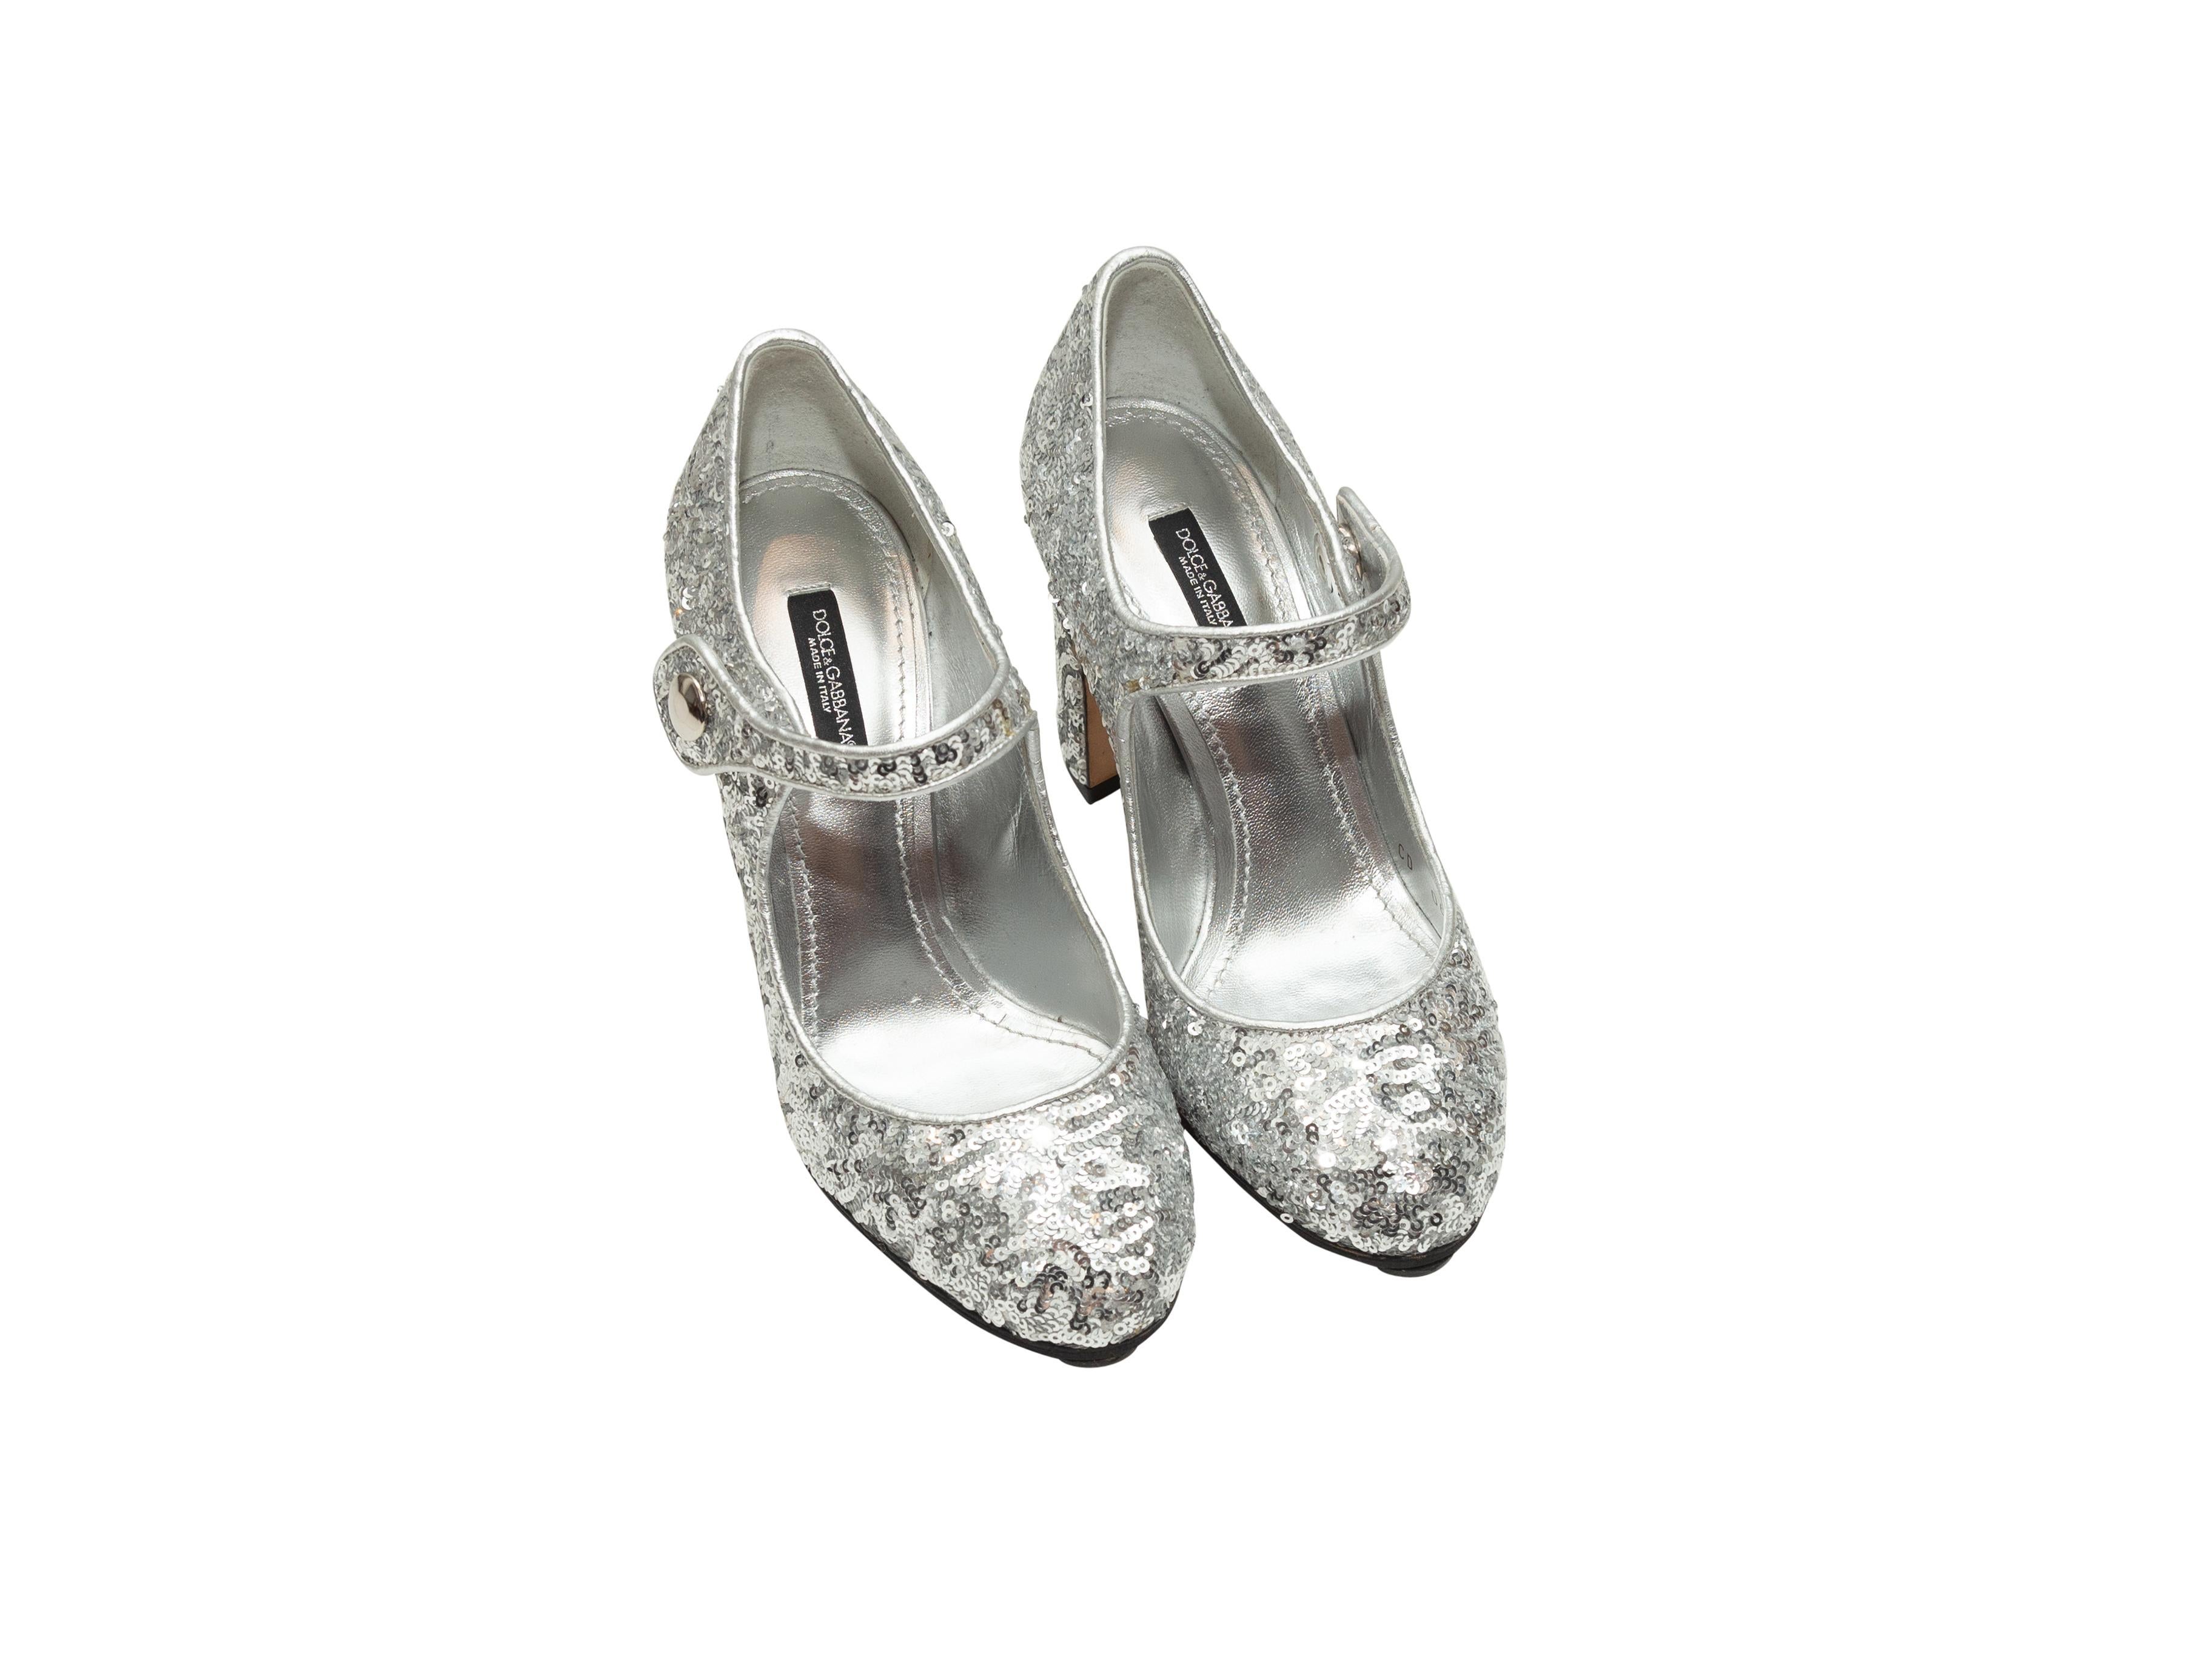 Product details: Silver sequin Mary Jane pumps by Dolce & Gabbana. Block heels. Designer size 36. 3.5